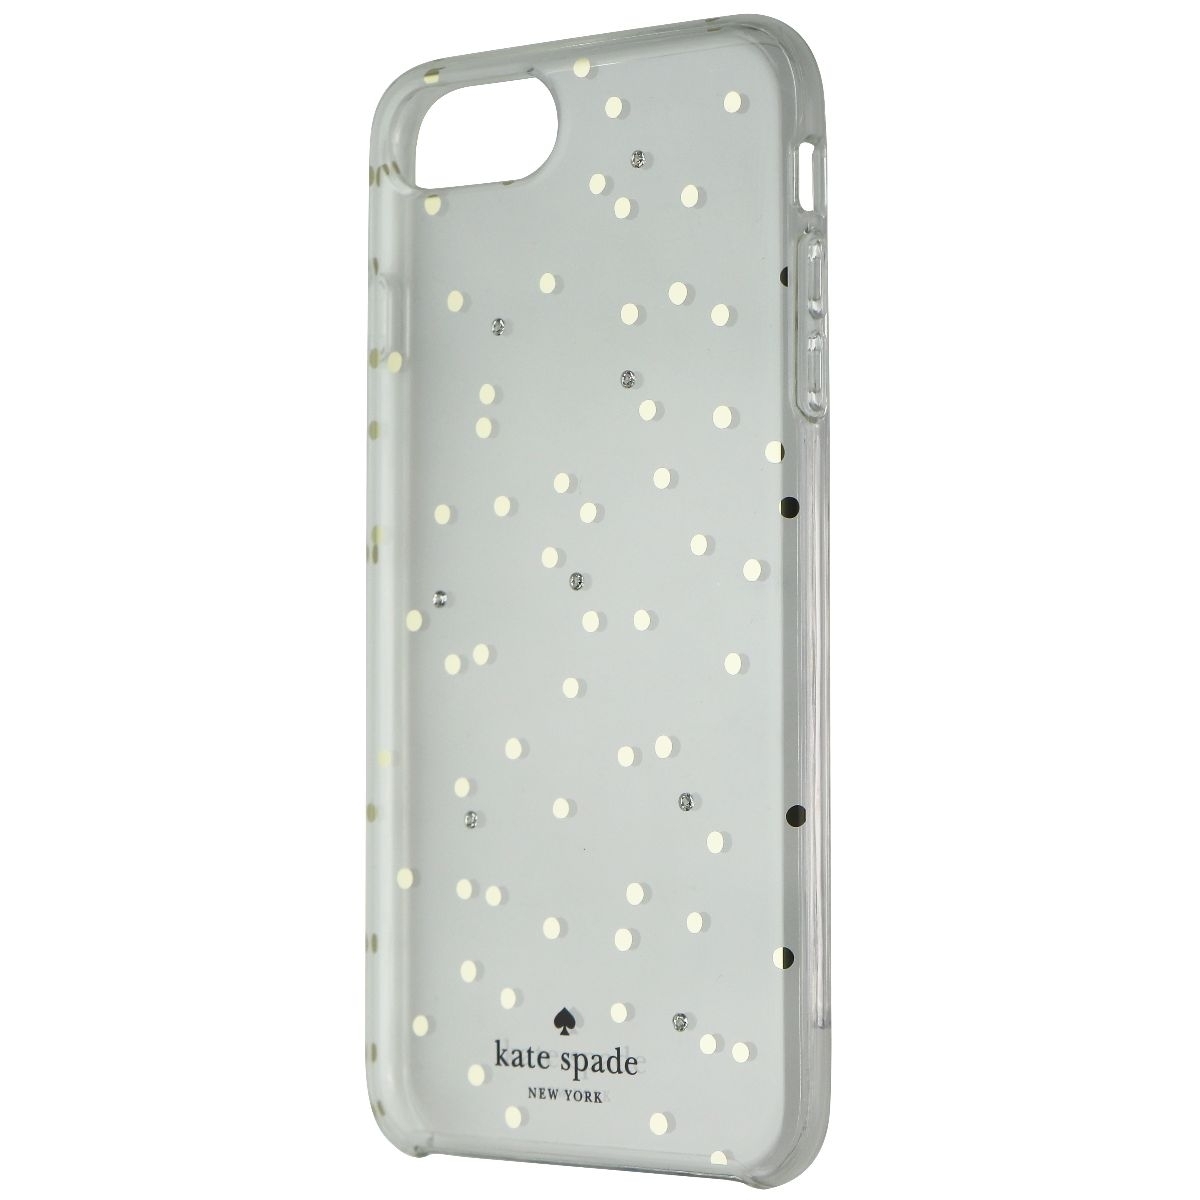 Kate Spade Protective Hardshell Case For IPhone 8 Plus/7 Plus - Gold Dots/Clear (Refurbished)